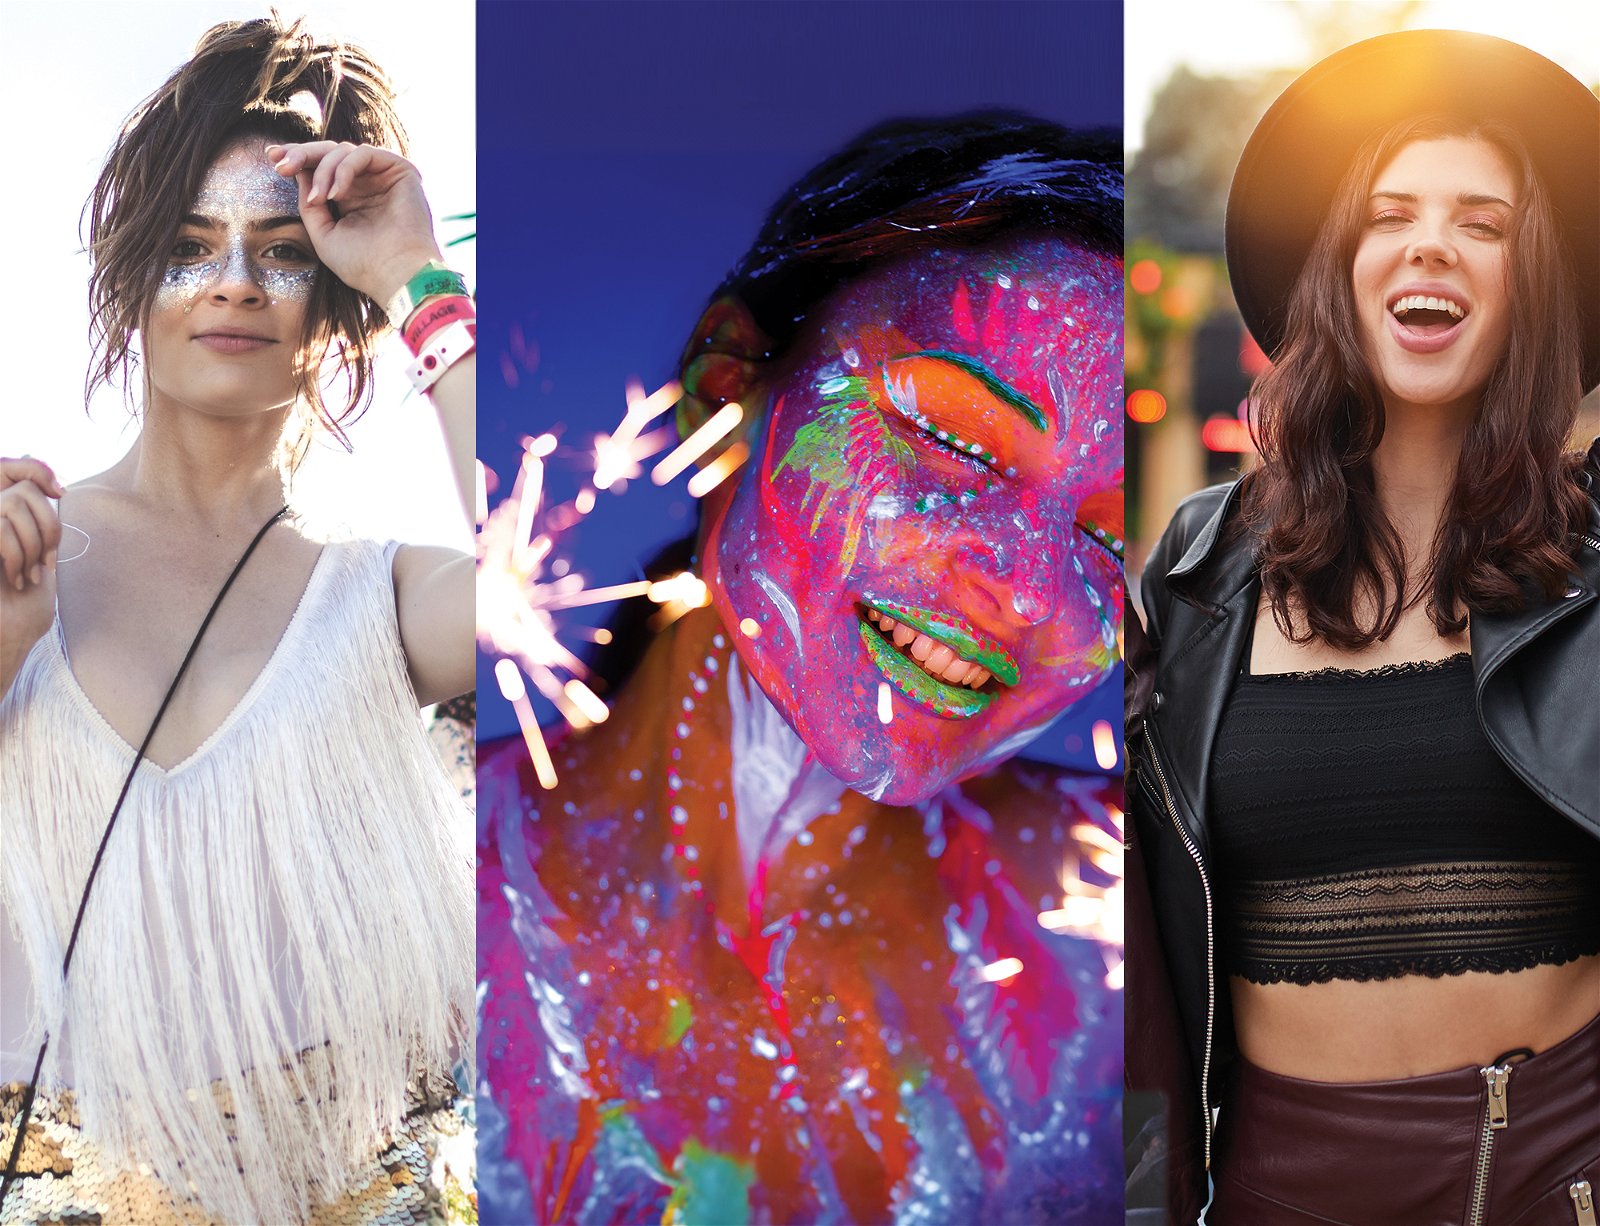 What's your festival piercing personality?